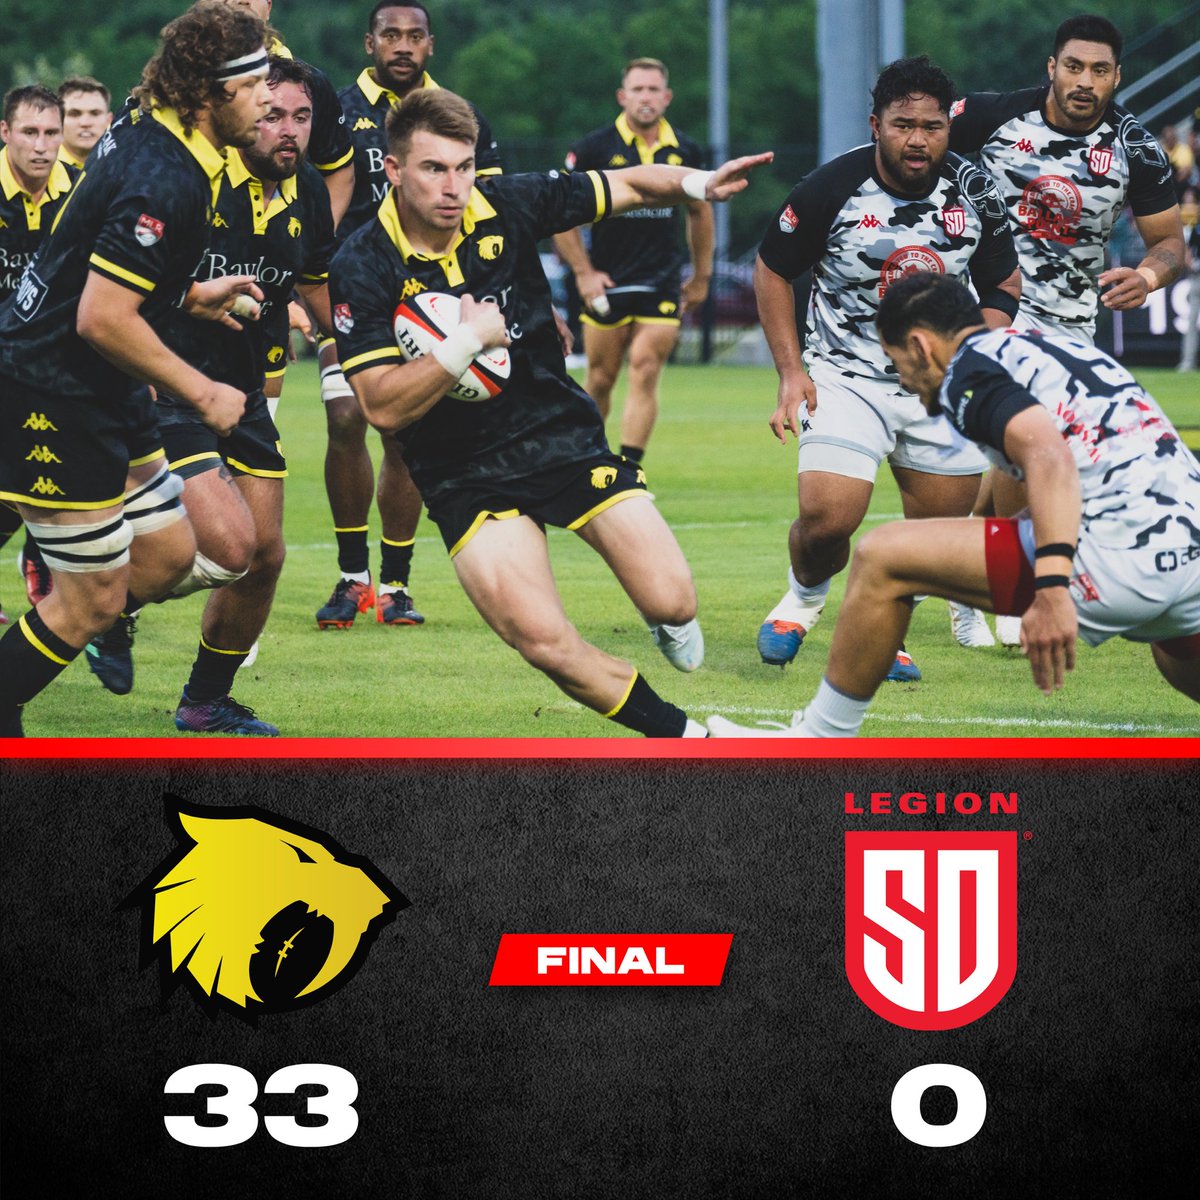 HOUSTON GIVES UP NOTHING A full 5 for the @HOUSaberCats, who record a seventh win in an impressive 2024 campaign @SDLegion | #HOUvSD | #MLR2024